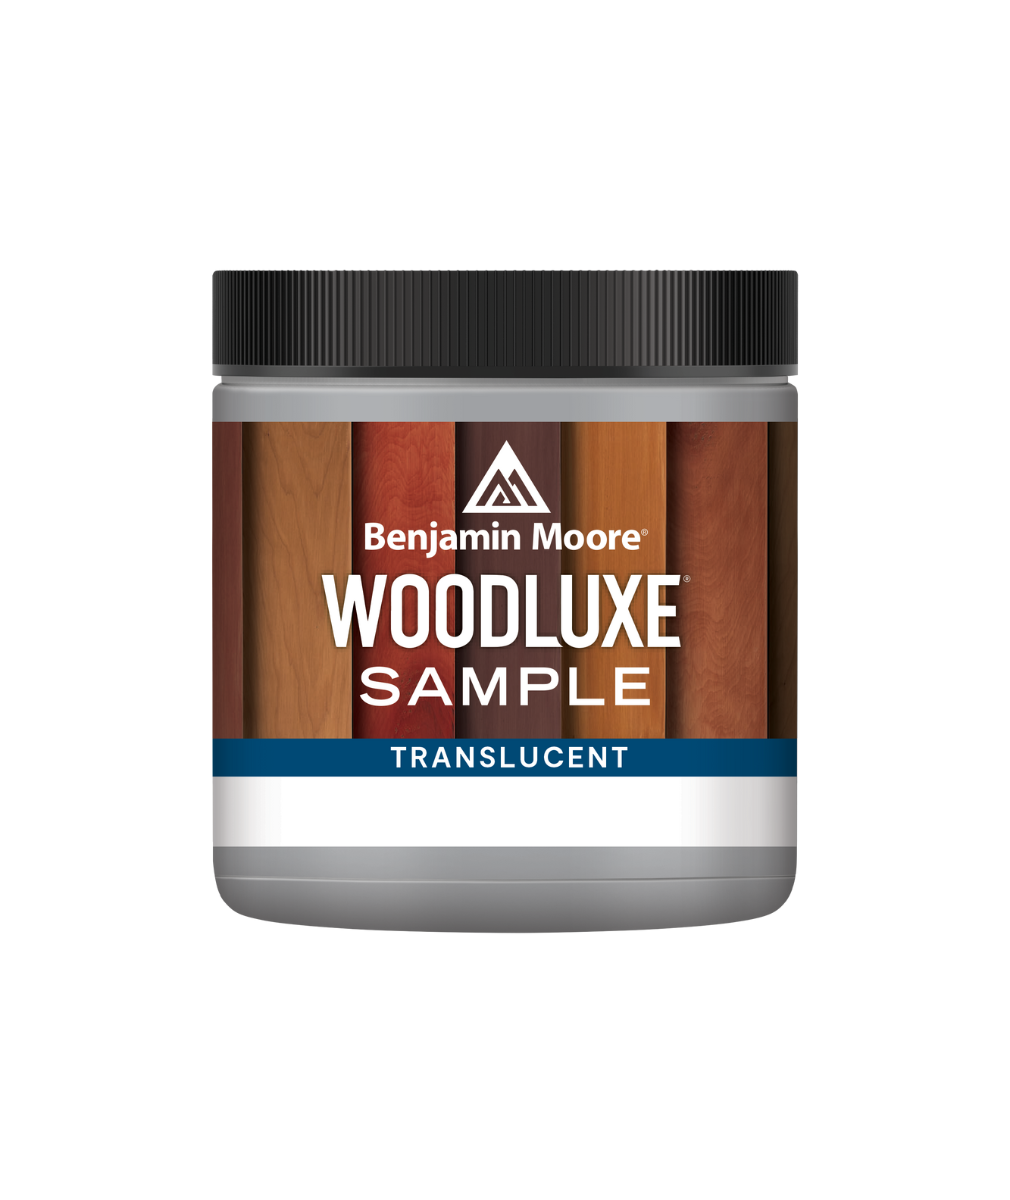 Benjamin Moore Woodluxe® Water-Based Translucent Exterior Stain Half-Pint Sample available at Catalina Paints in Los Angeles County.